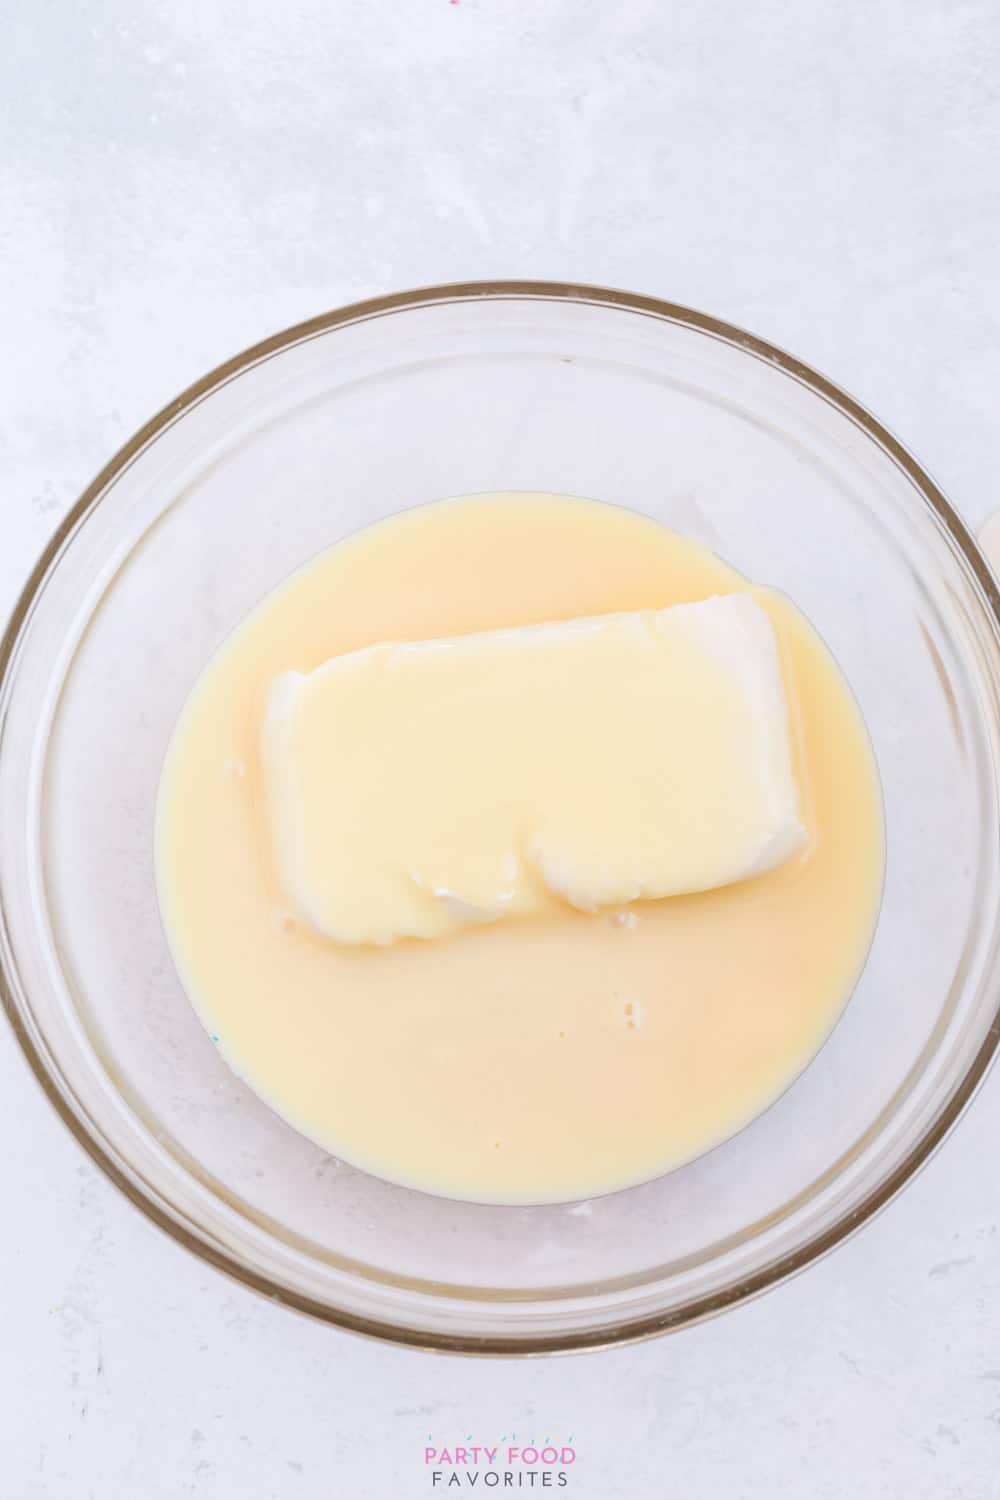 mix together cream cheese and sweetened condensed milk